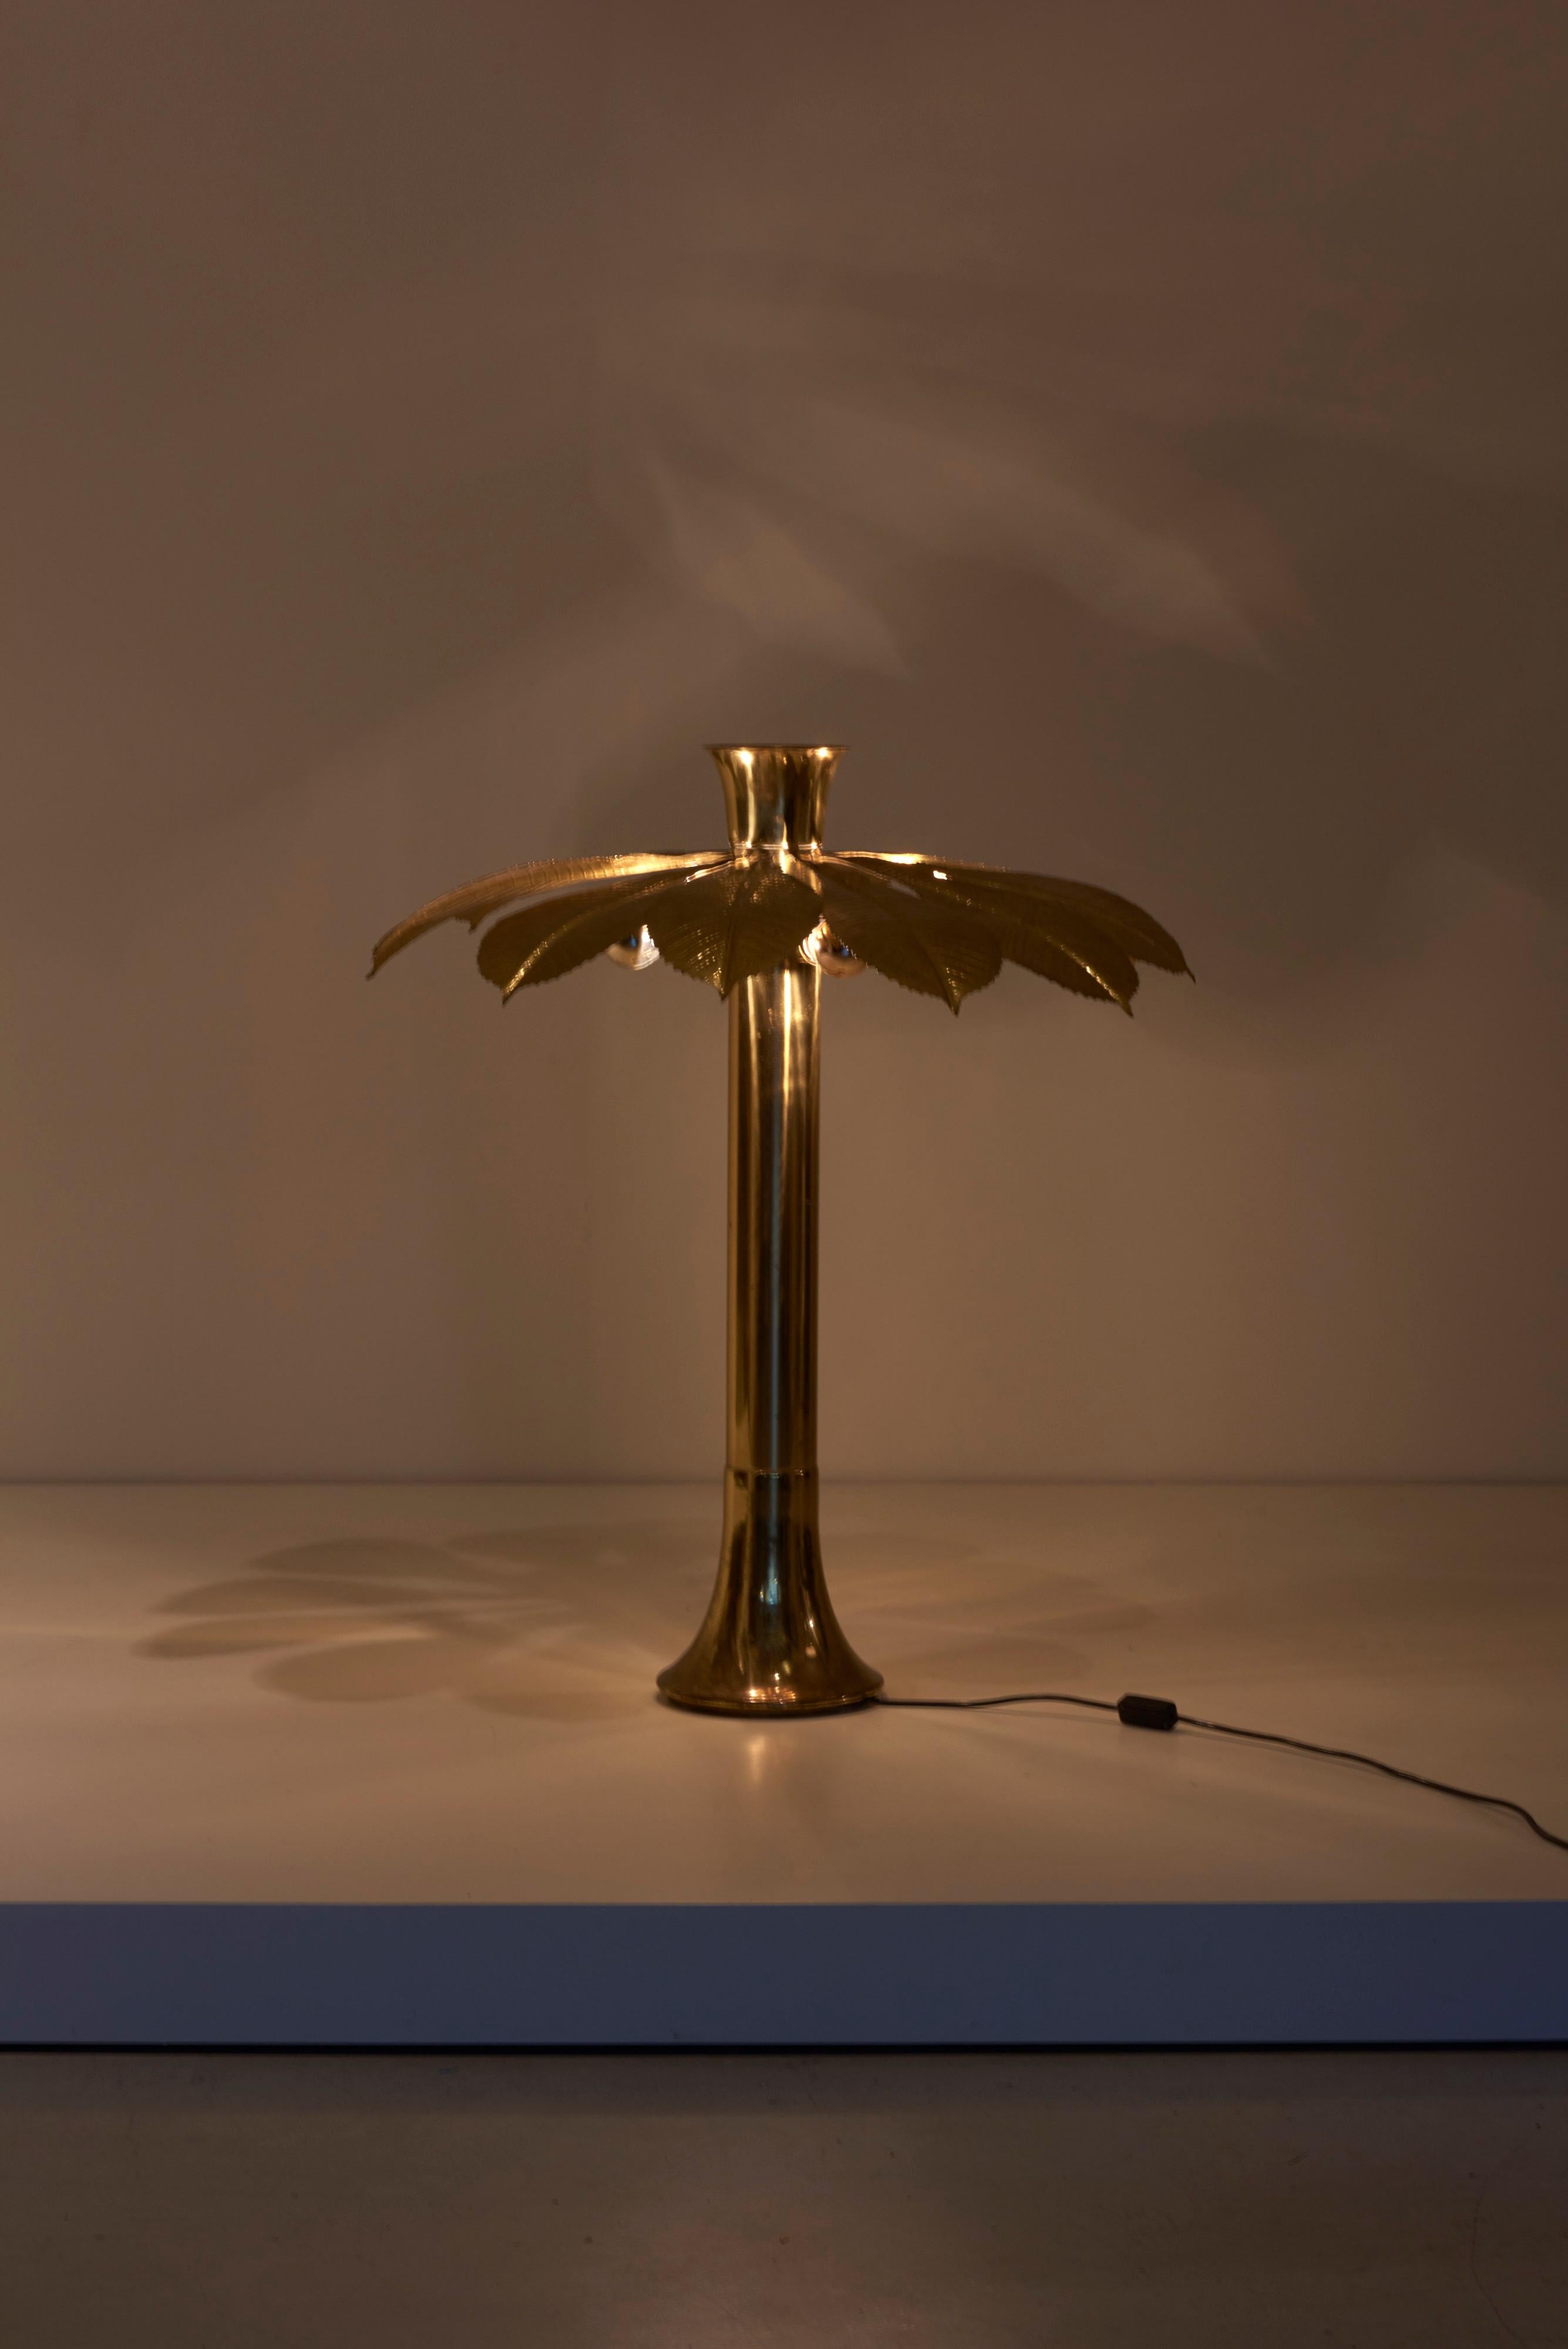 Very rare and elegant floor lamp with multiple rhubarb leaves by the Italian designer Tommaso Barbi. The lamp is made of brass and the reflexion of the light on the brass brings a cozy atmosphere in every room. The lamp is a icon of the 1970s design